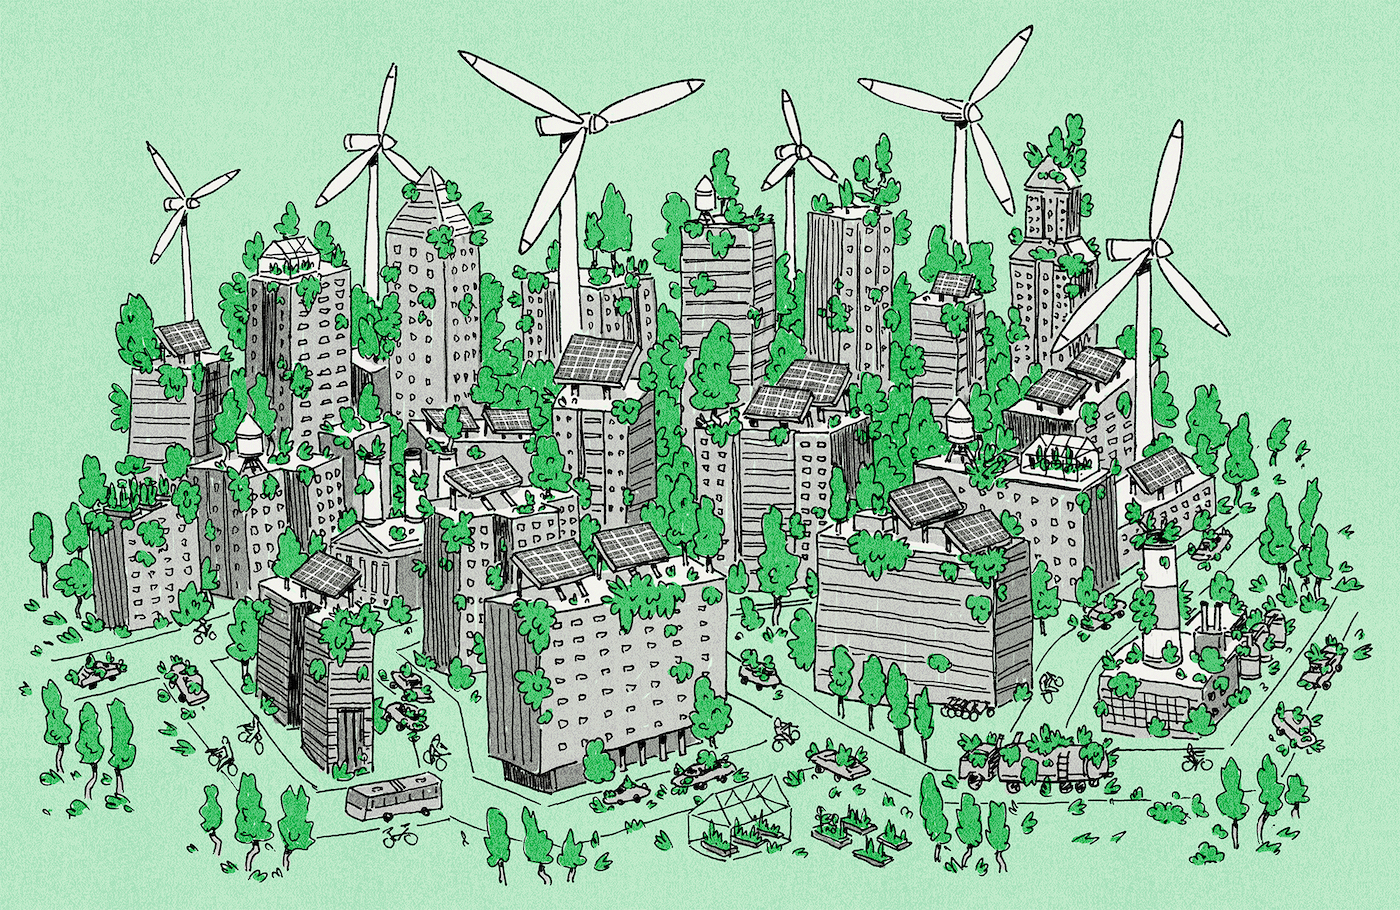 An illustration of a city overtaken by green energy initiatives